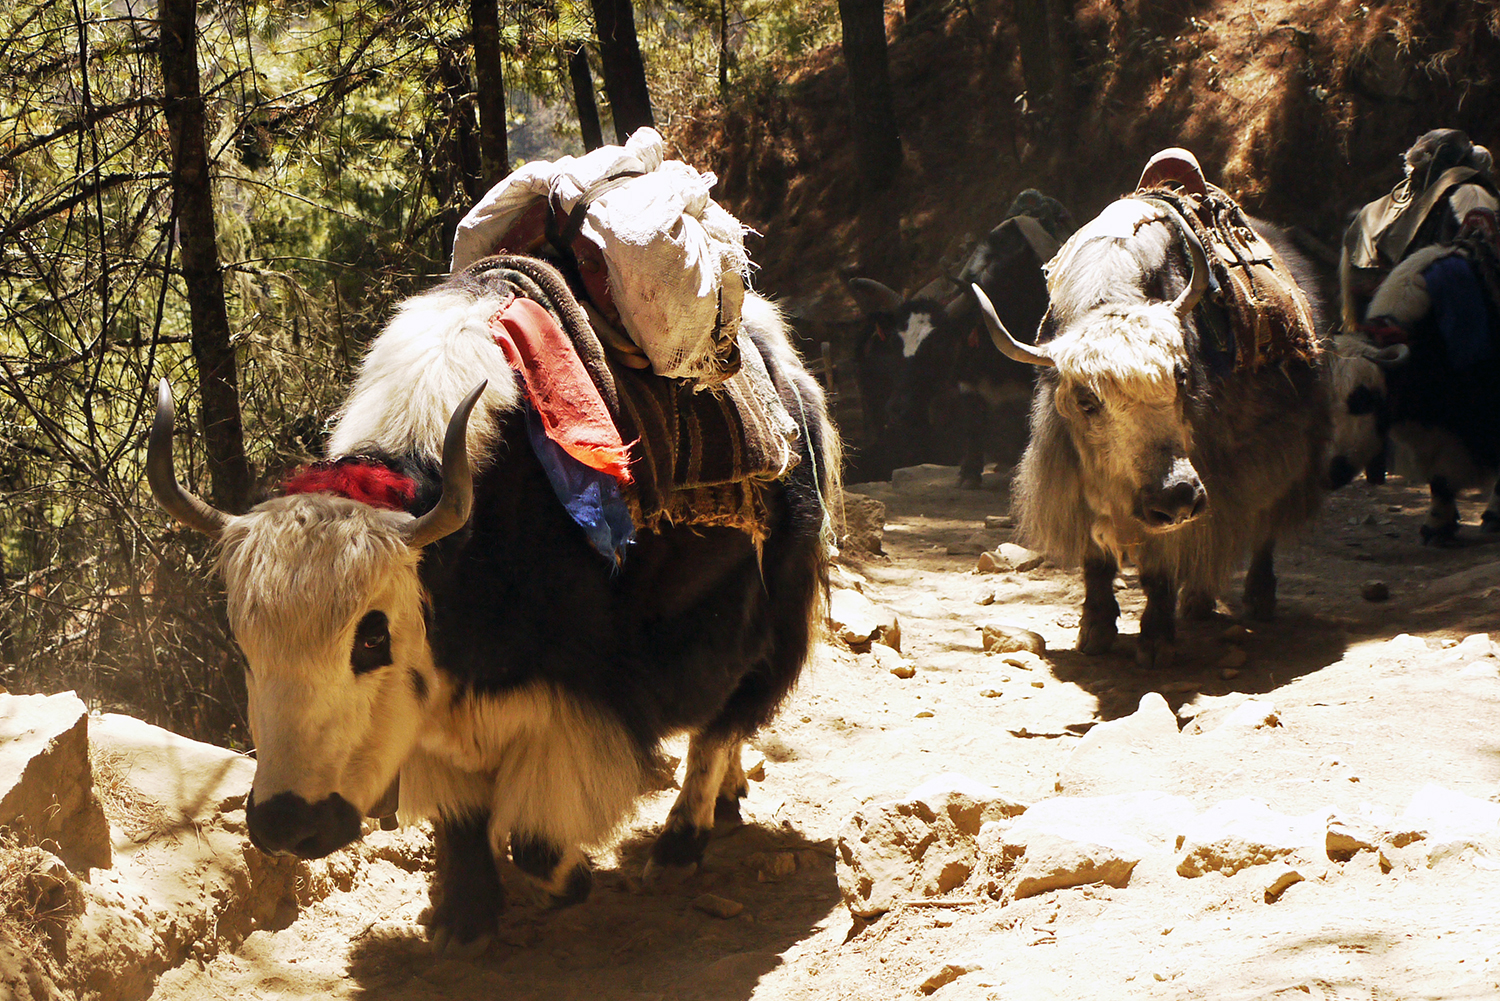 Sharing the path on the EBC trek with shaggy yaks | Everest Base Camp Trek independently 